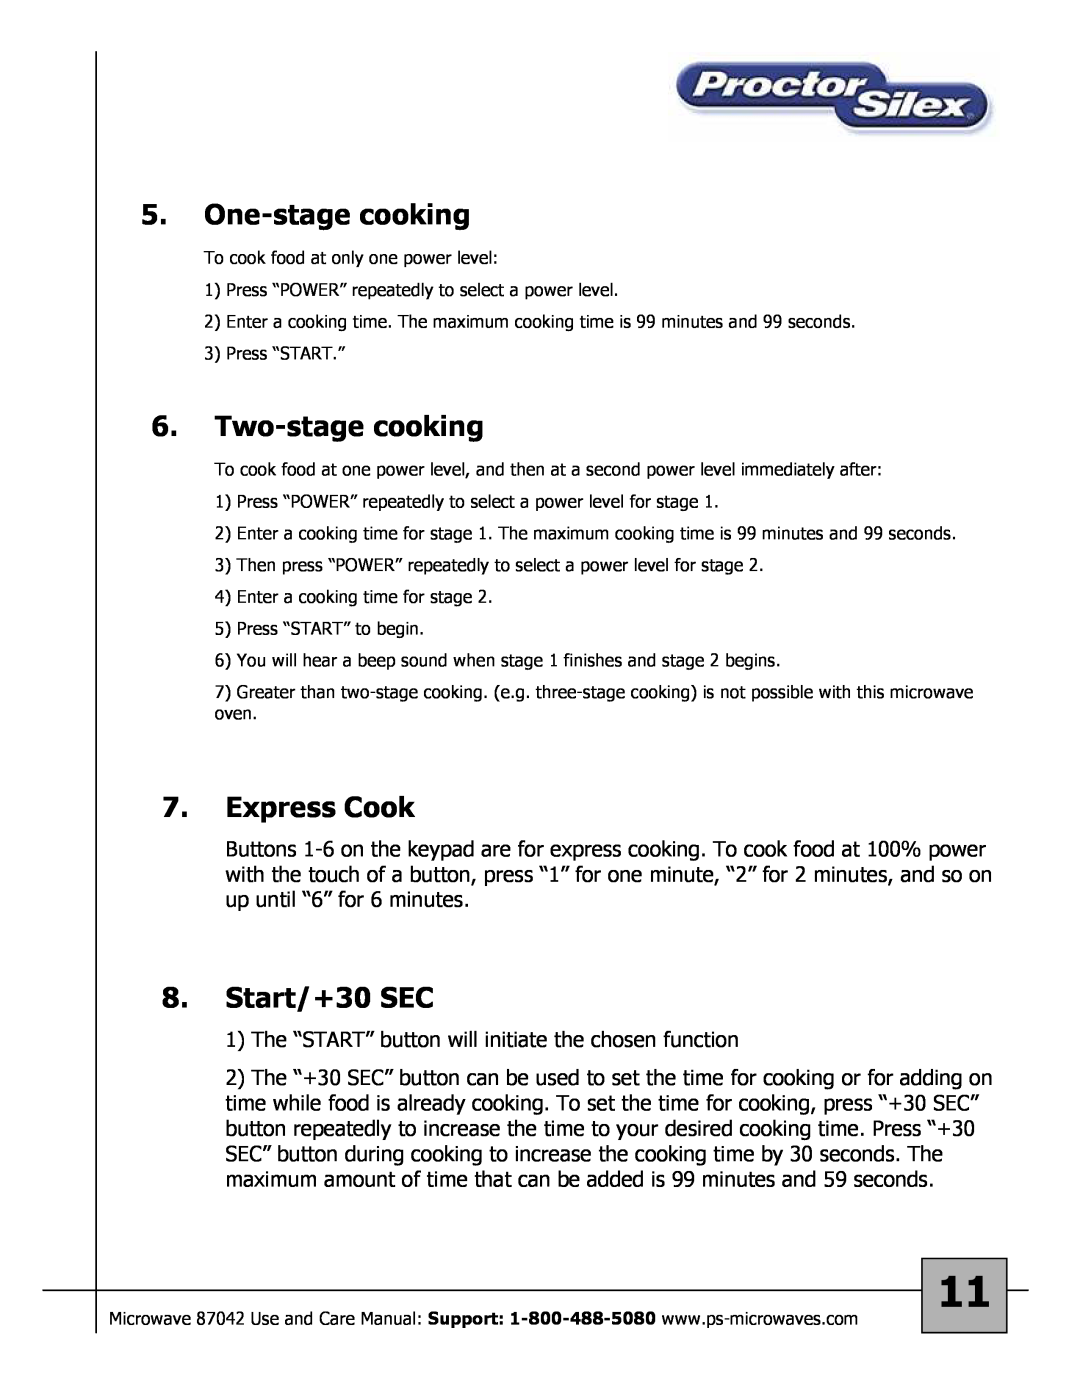 Proctor-Silex 87027 owner manual One-stagecooking, Two-stagecooking, Express Cook, Start/+30 SEC 